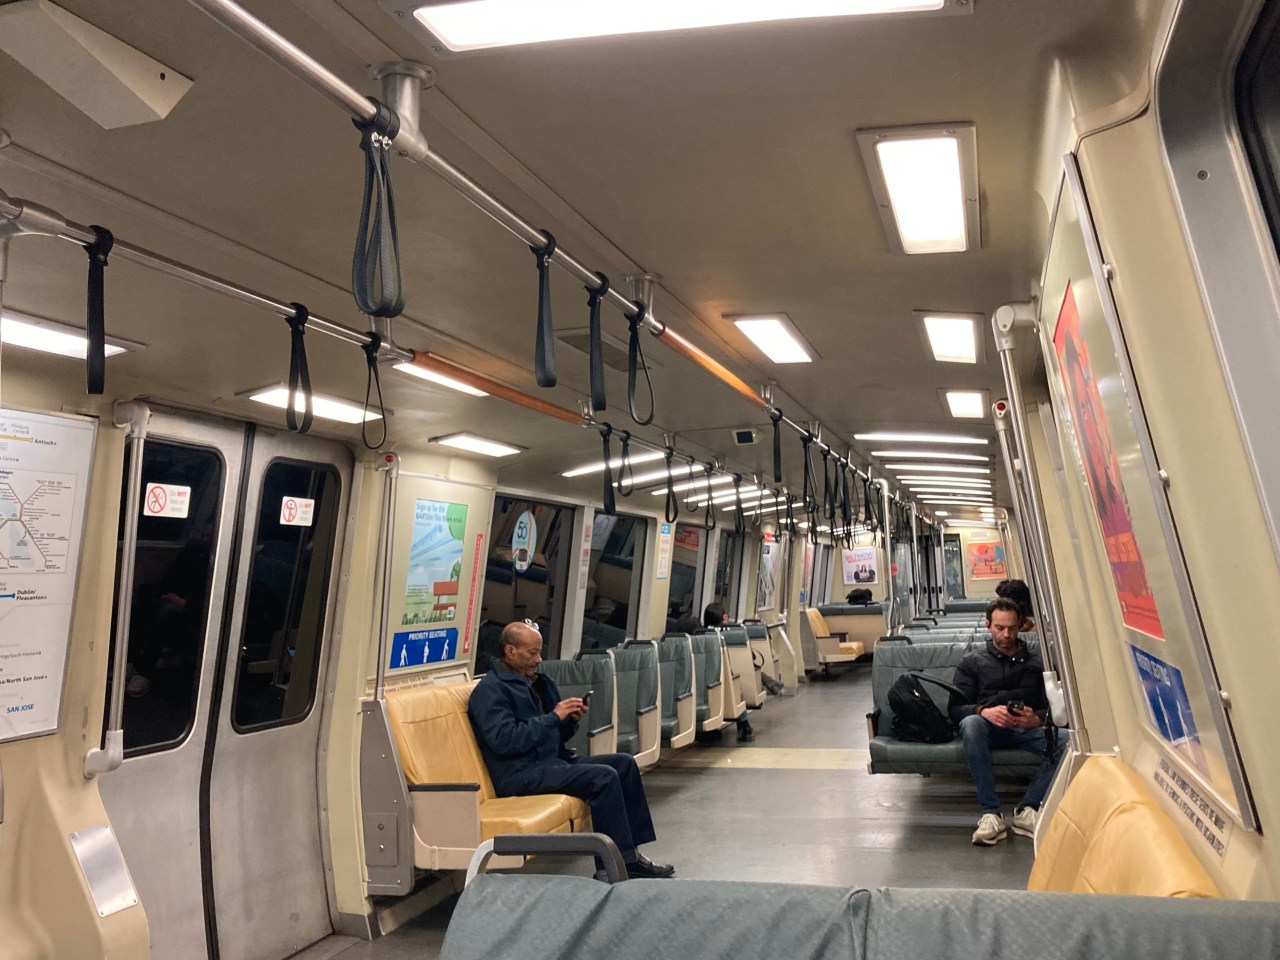 The interior of a BART railcar. Note the soft vinyl seats. Photo: John Greenfield